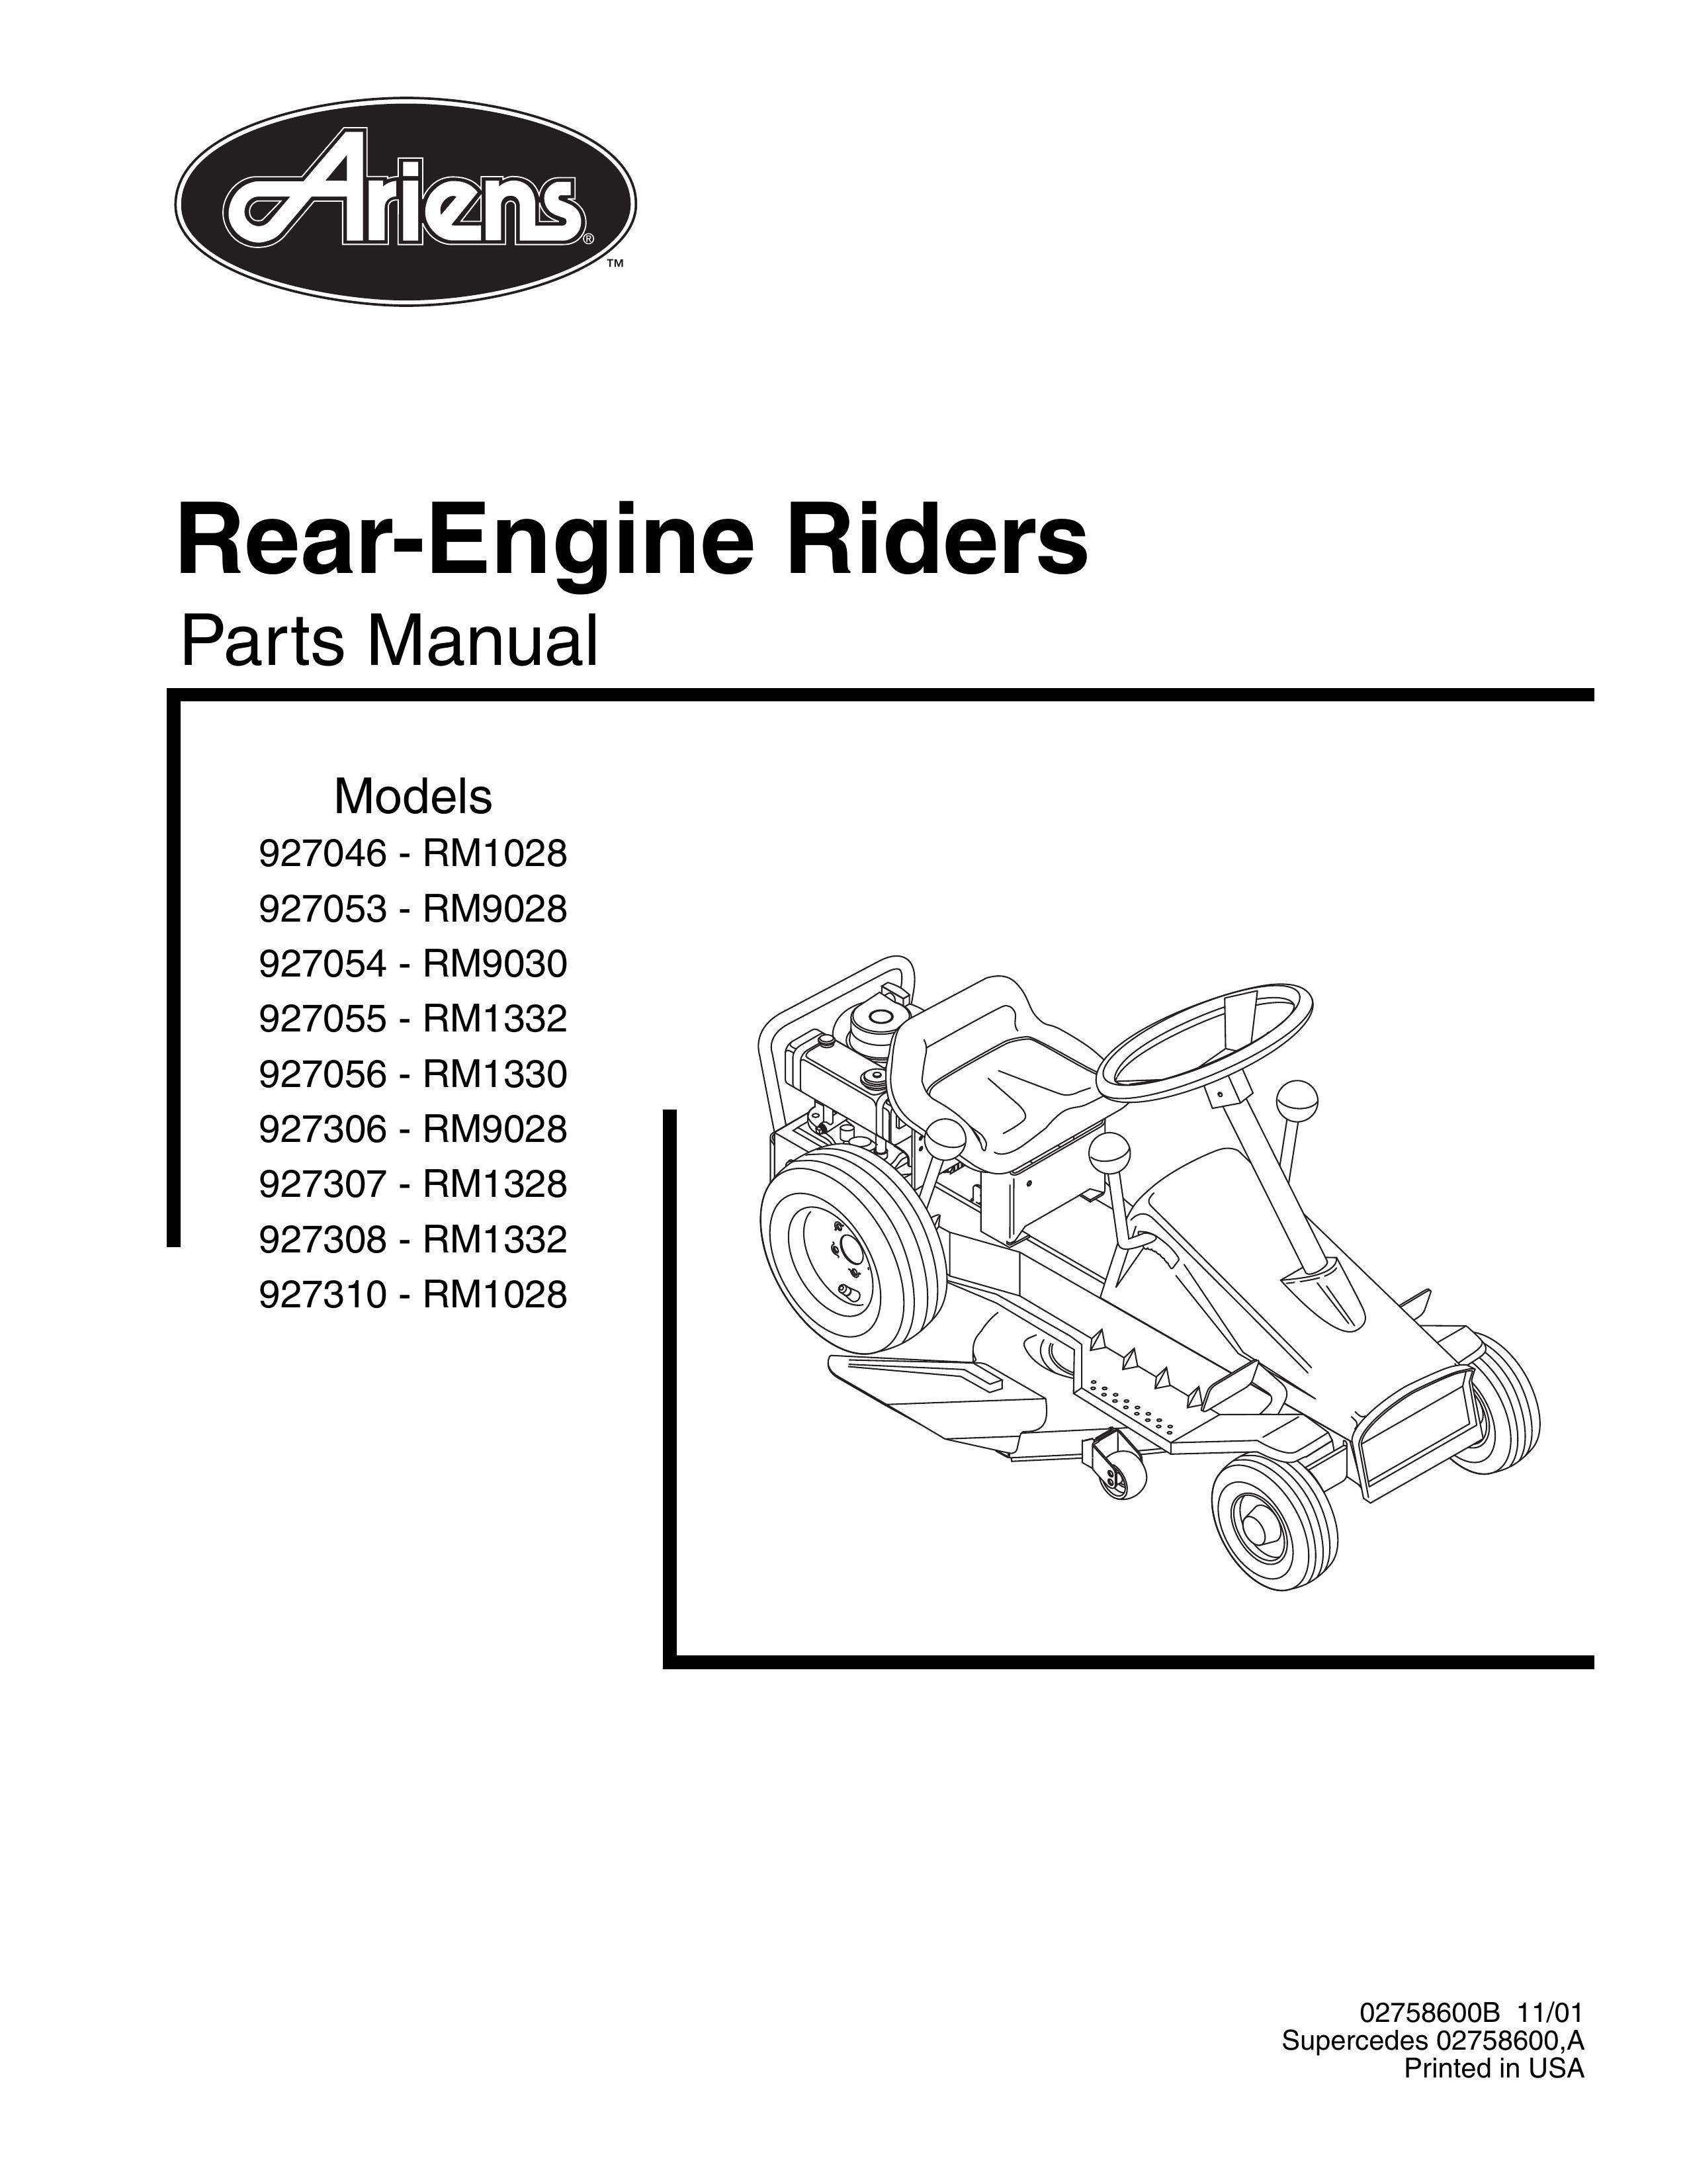 Ariens 927054 - RM9030 Camcorder User Manual